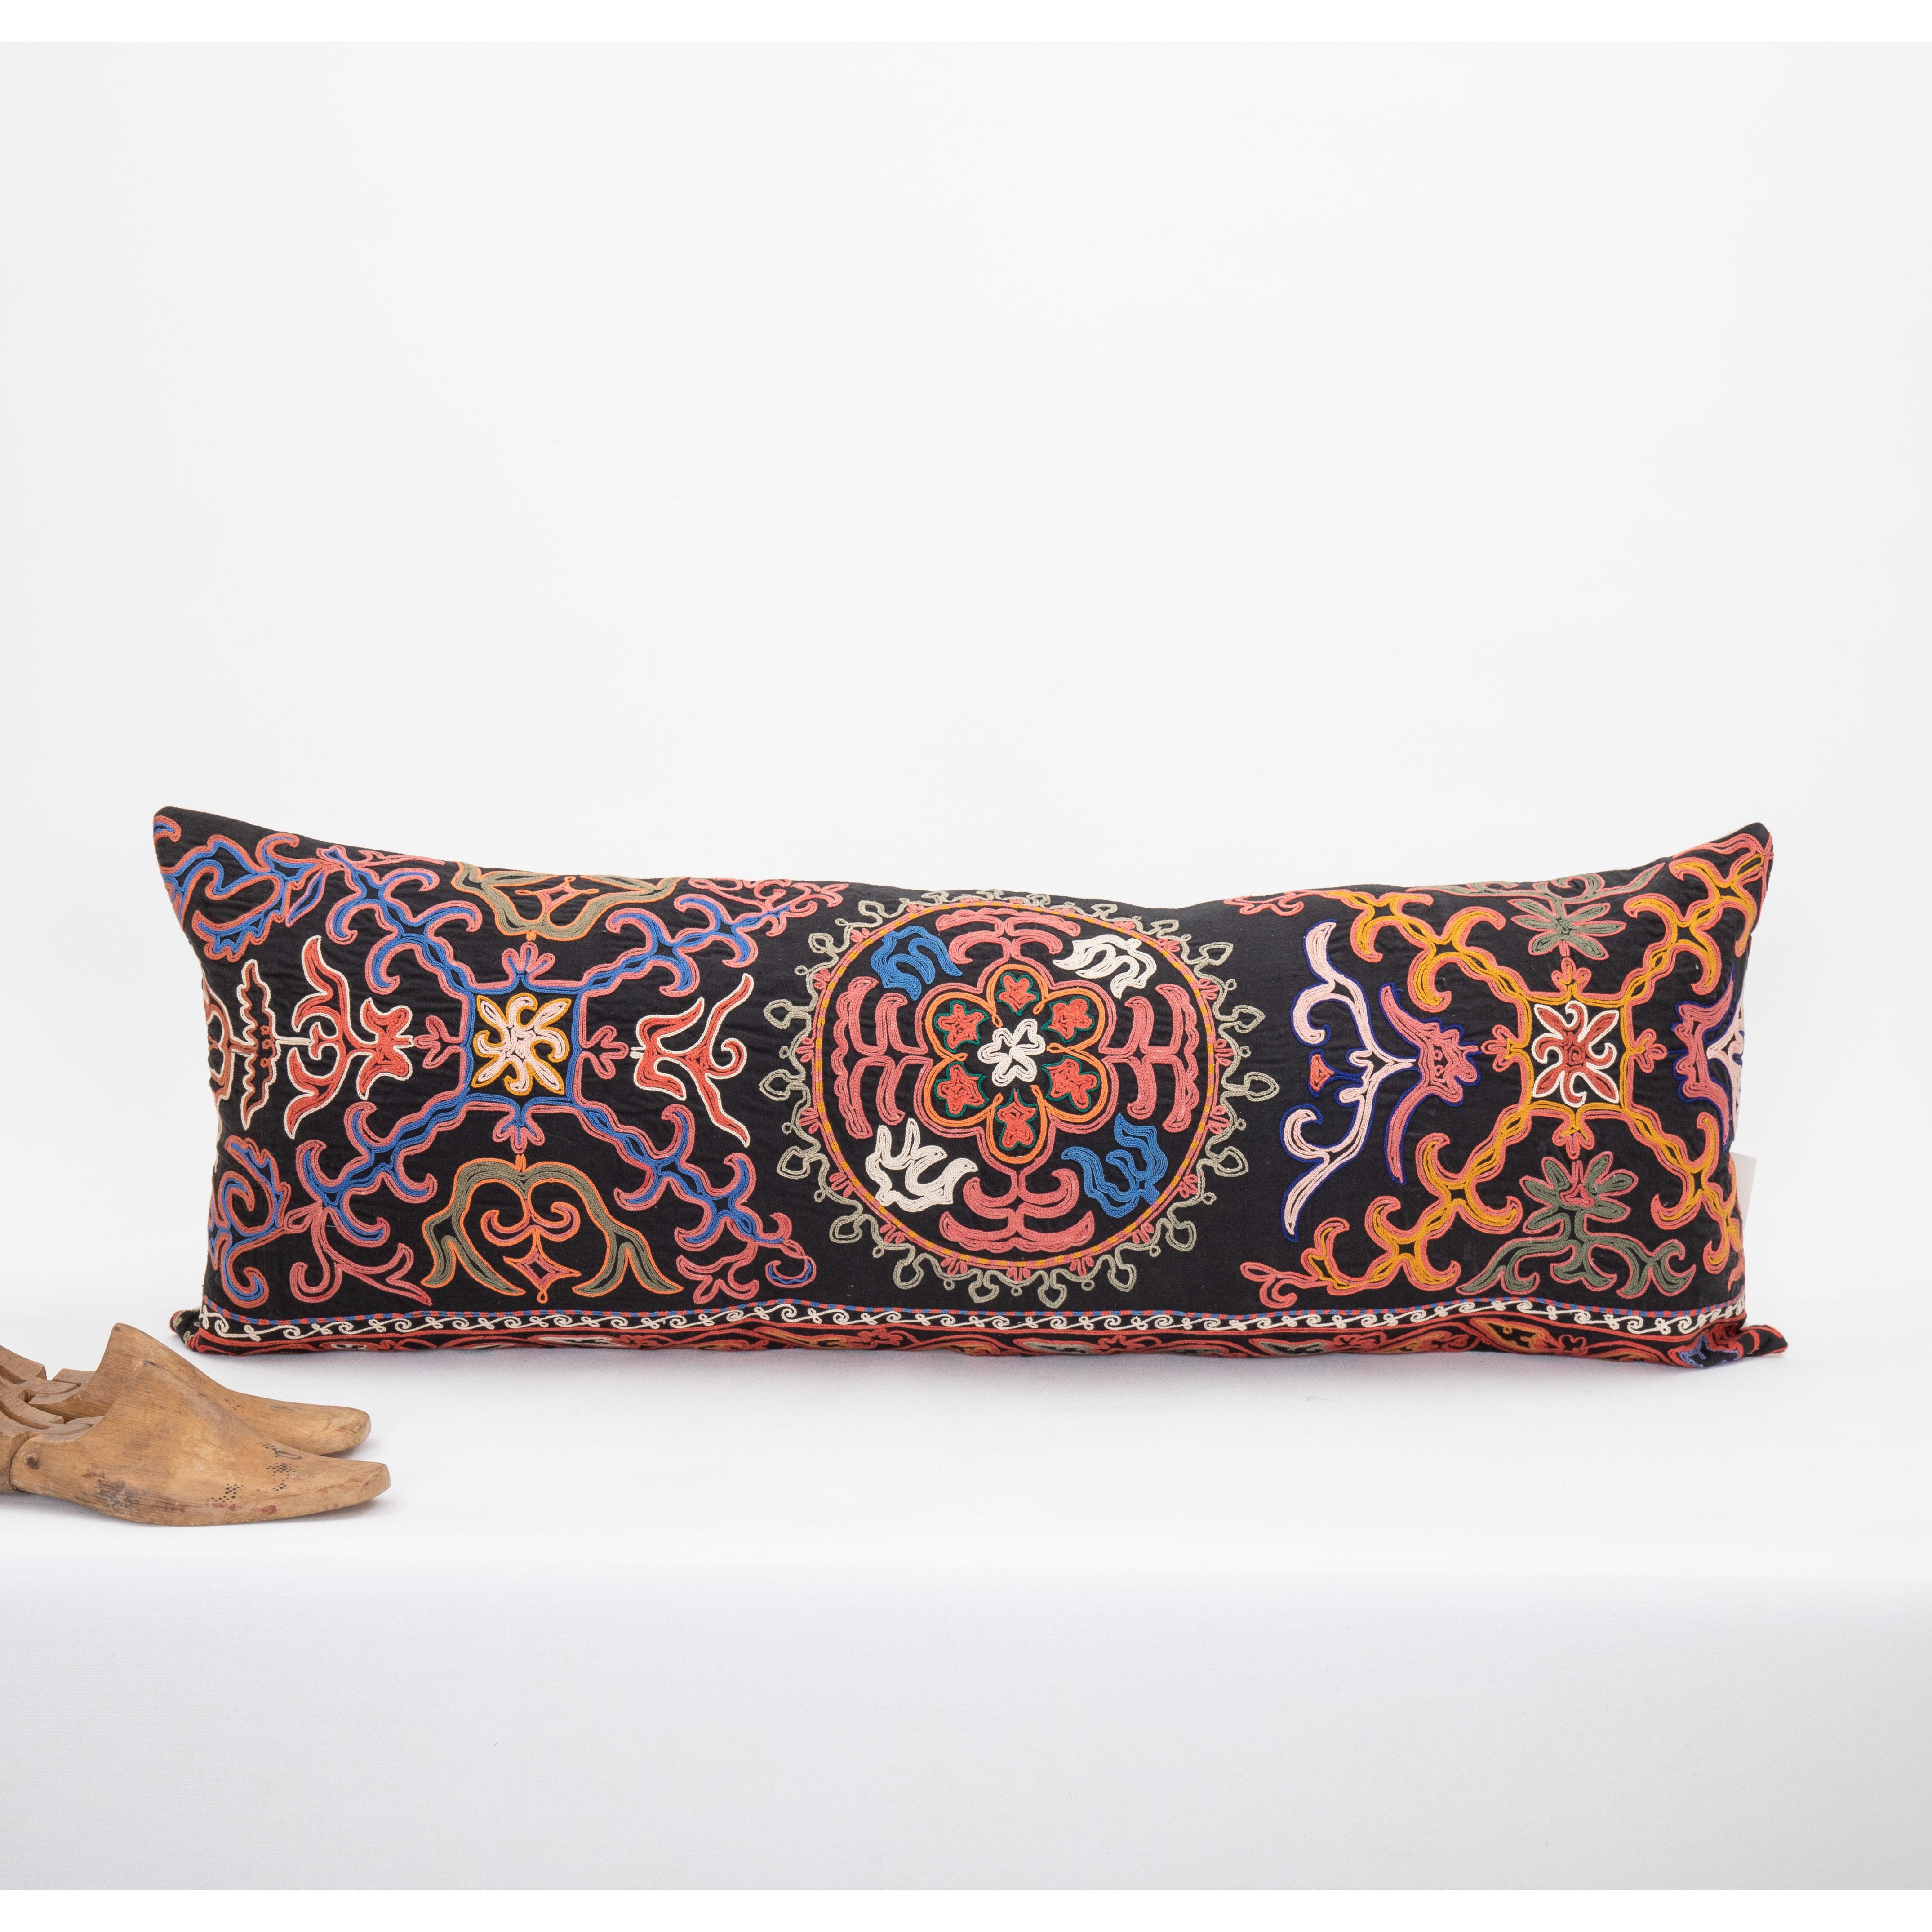 Folk Art Pillowcase made from a mid 20th. C. Kazakh / Kyrgyz Embroidery For Sale